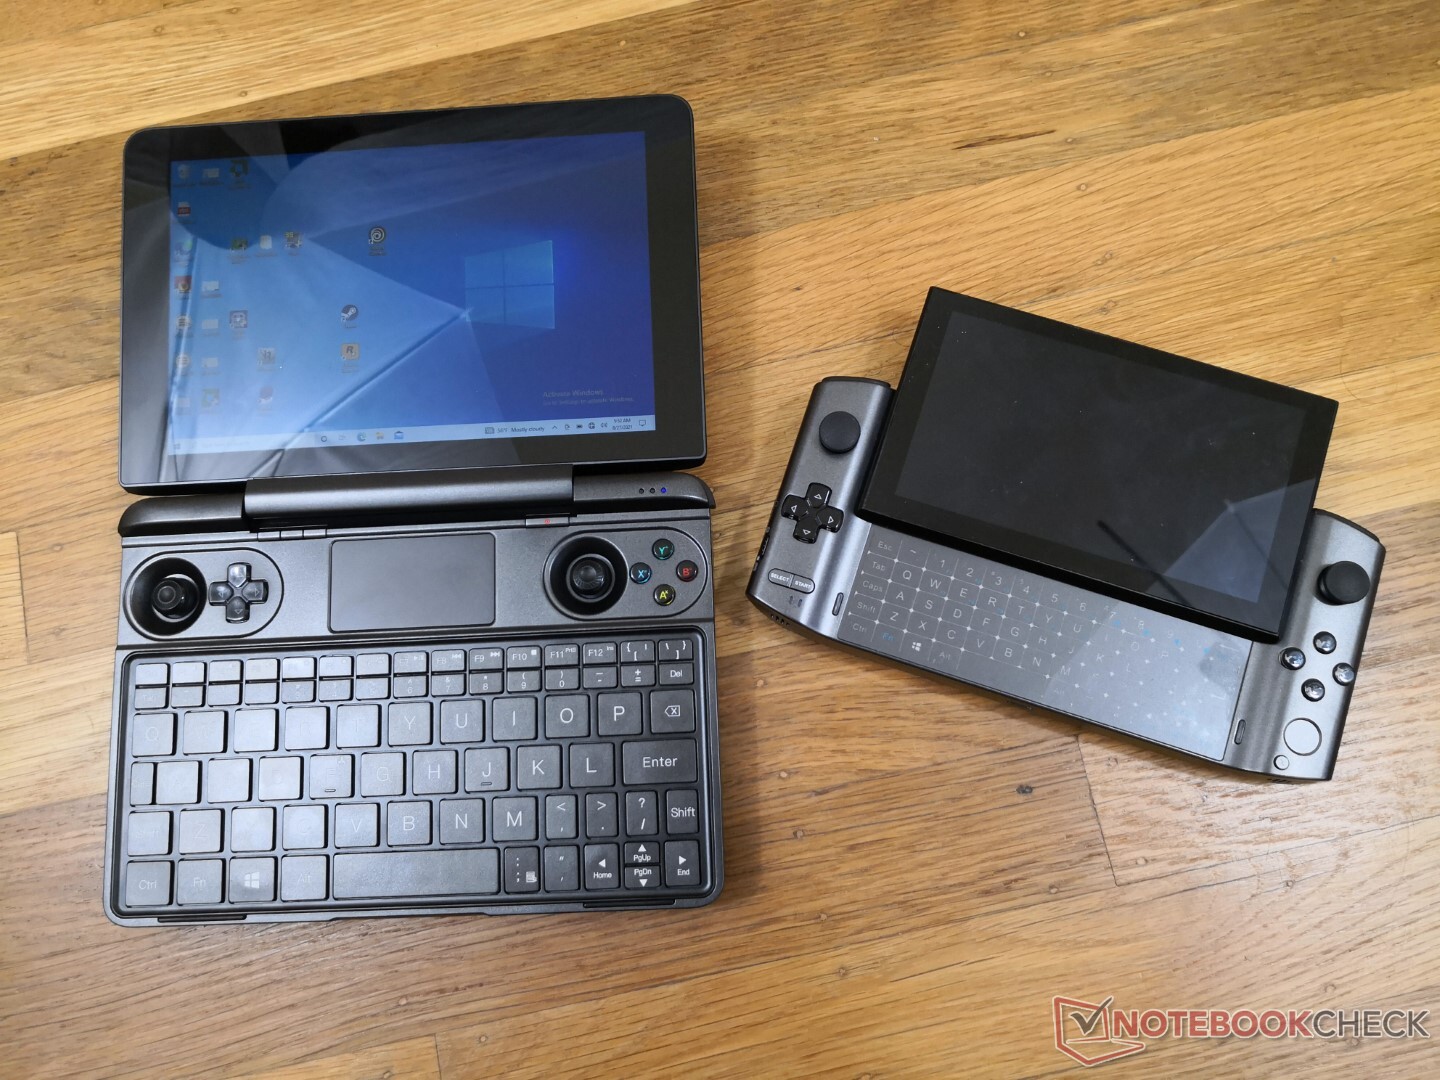 GPD Win Mini: First hands-on images released of compact AMD Ryzen 7040U  gaming handheld -  News